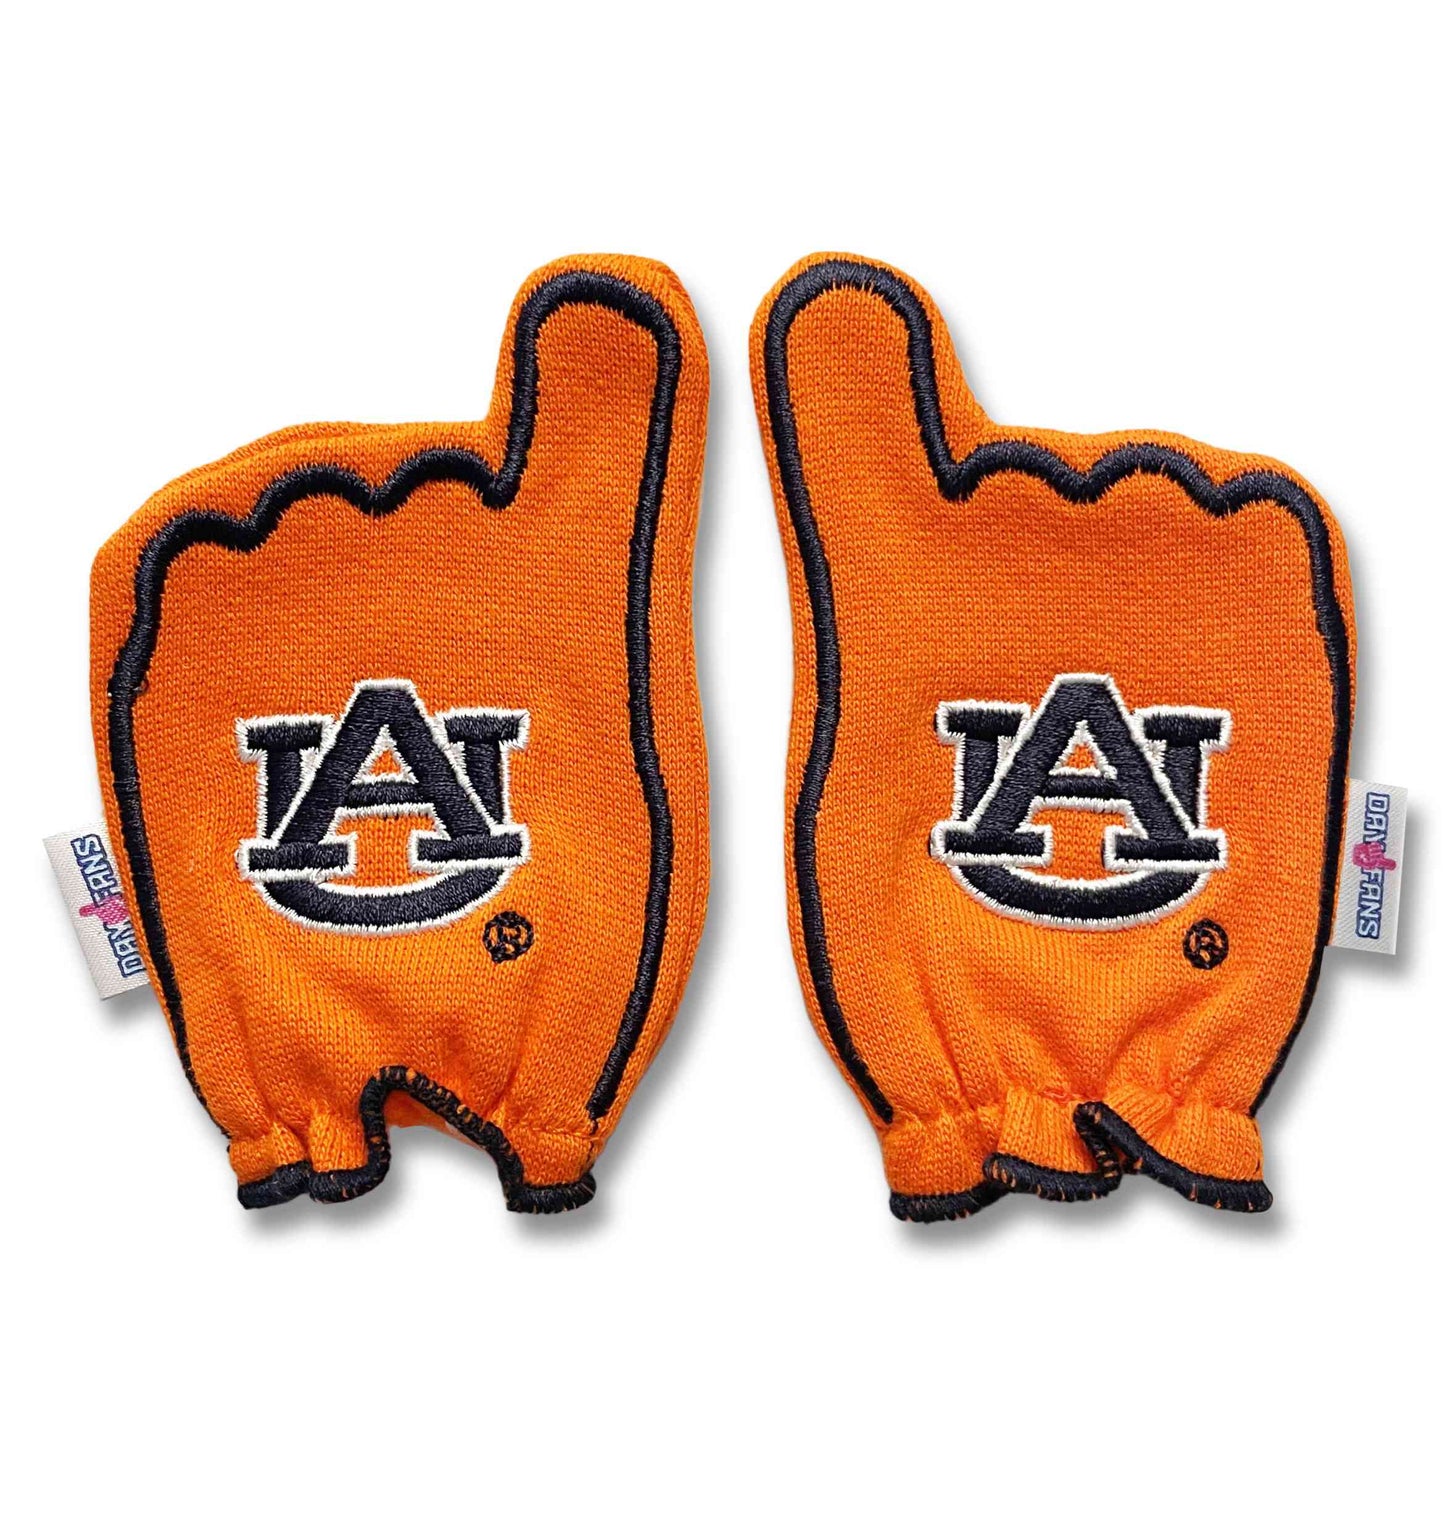 Auburn War Eagle FanMitts Baby Mittens Orange Back Pair